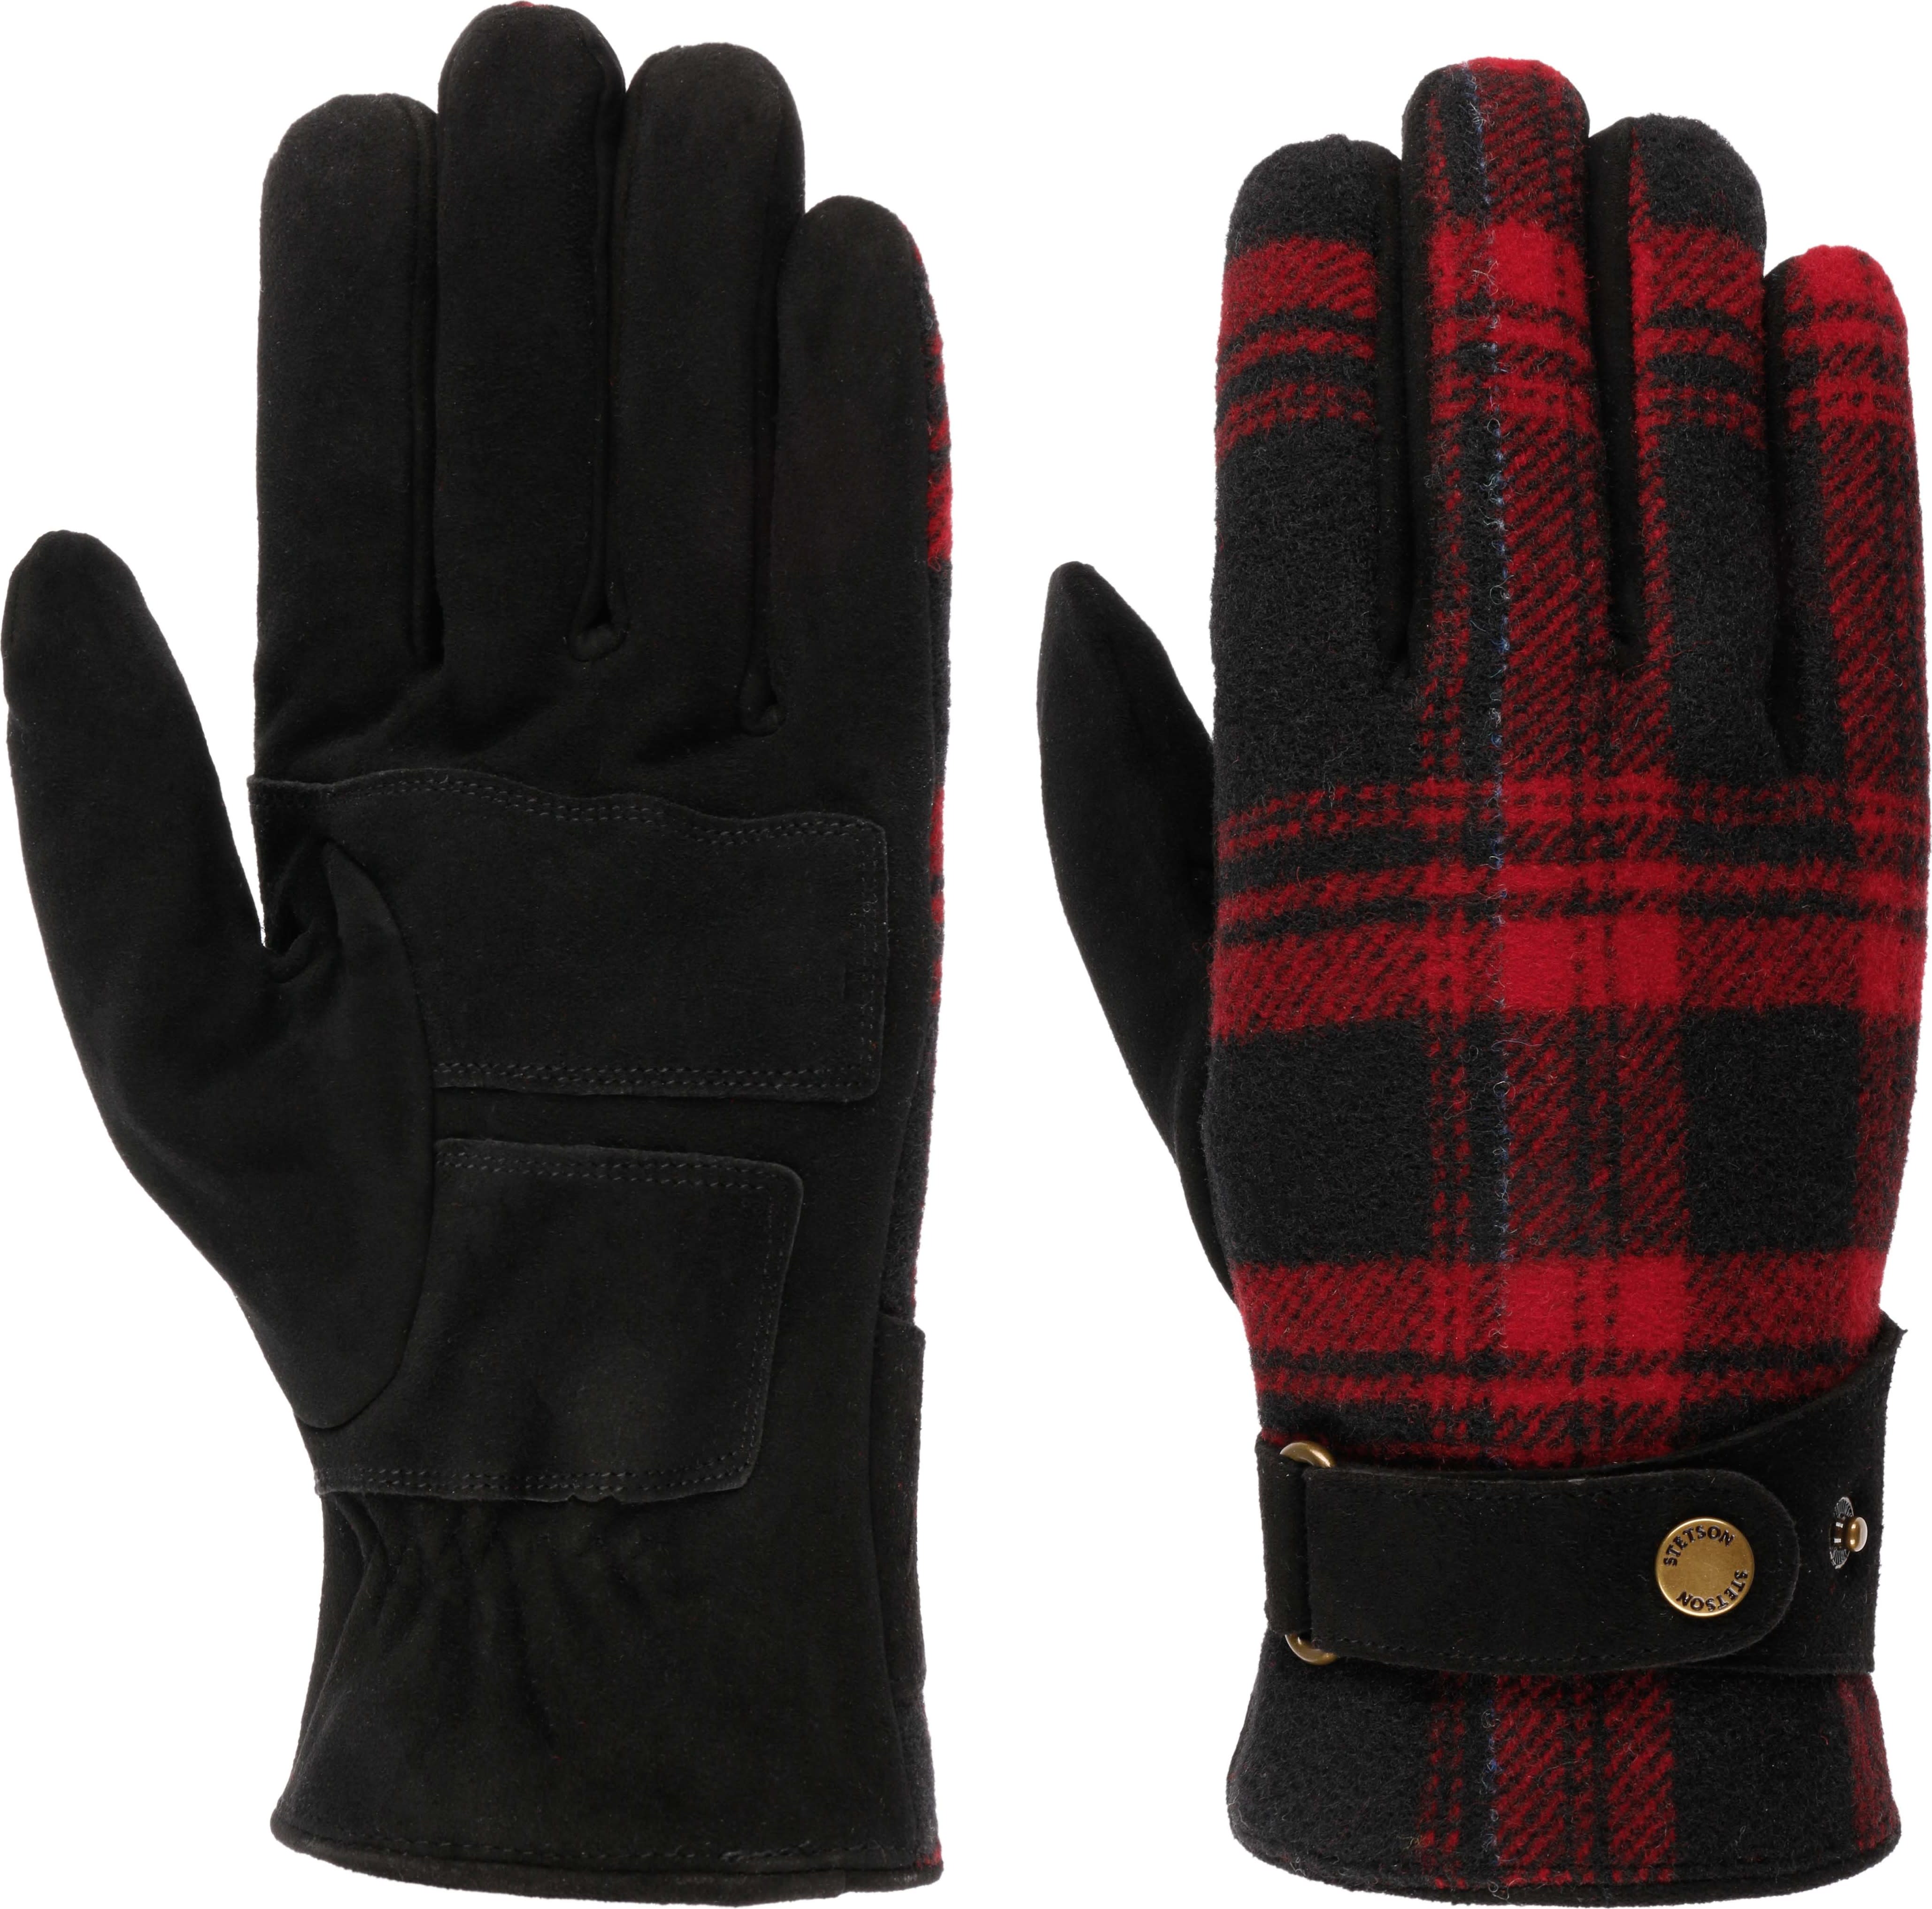 Stetson Men’s Gloves Goat Suede/Shadow Plaid Black/Red